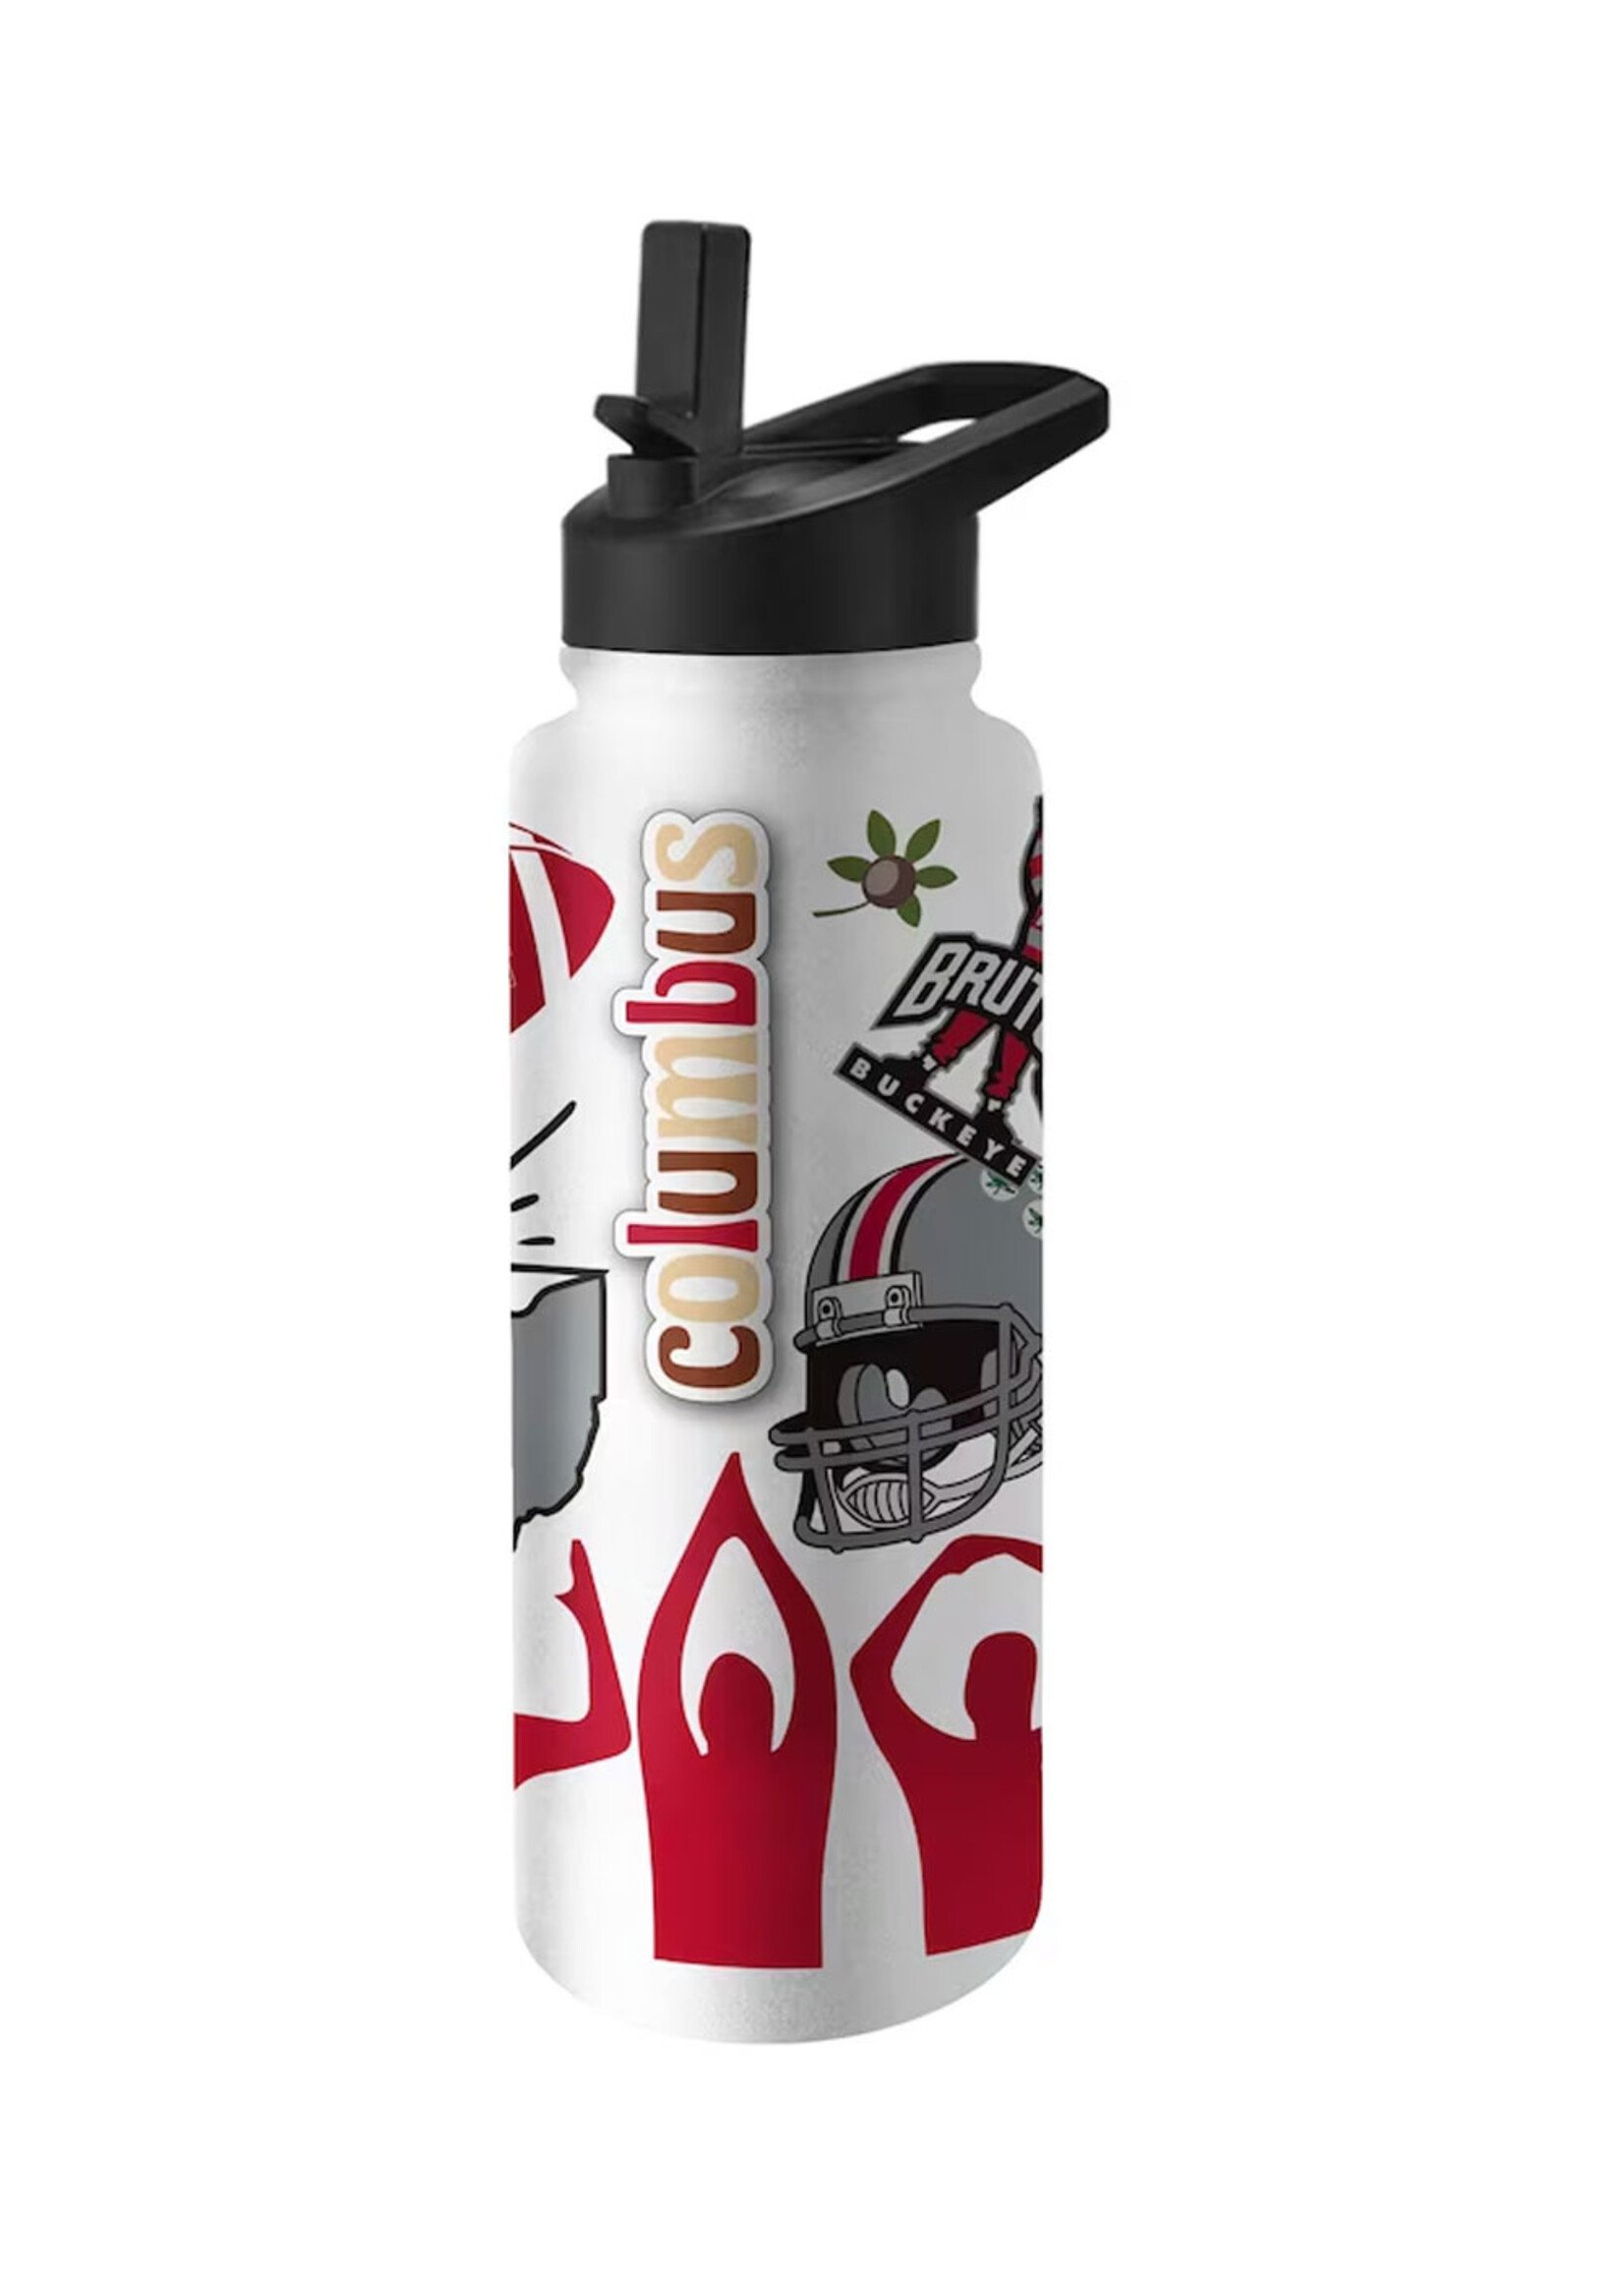 Ohio State Squeezy Water Bottle